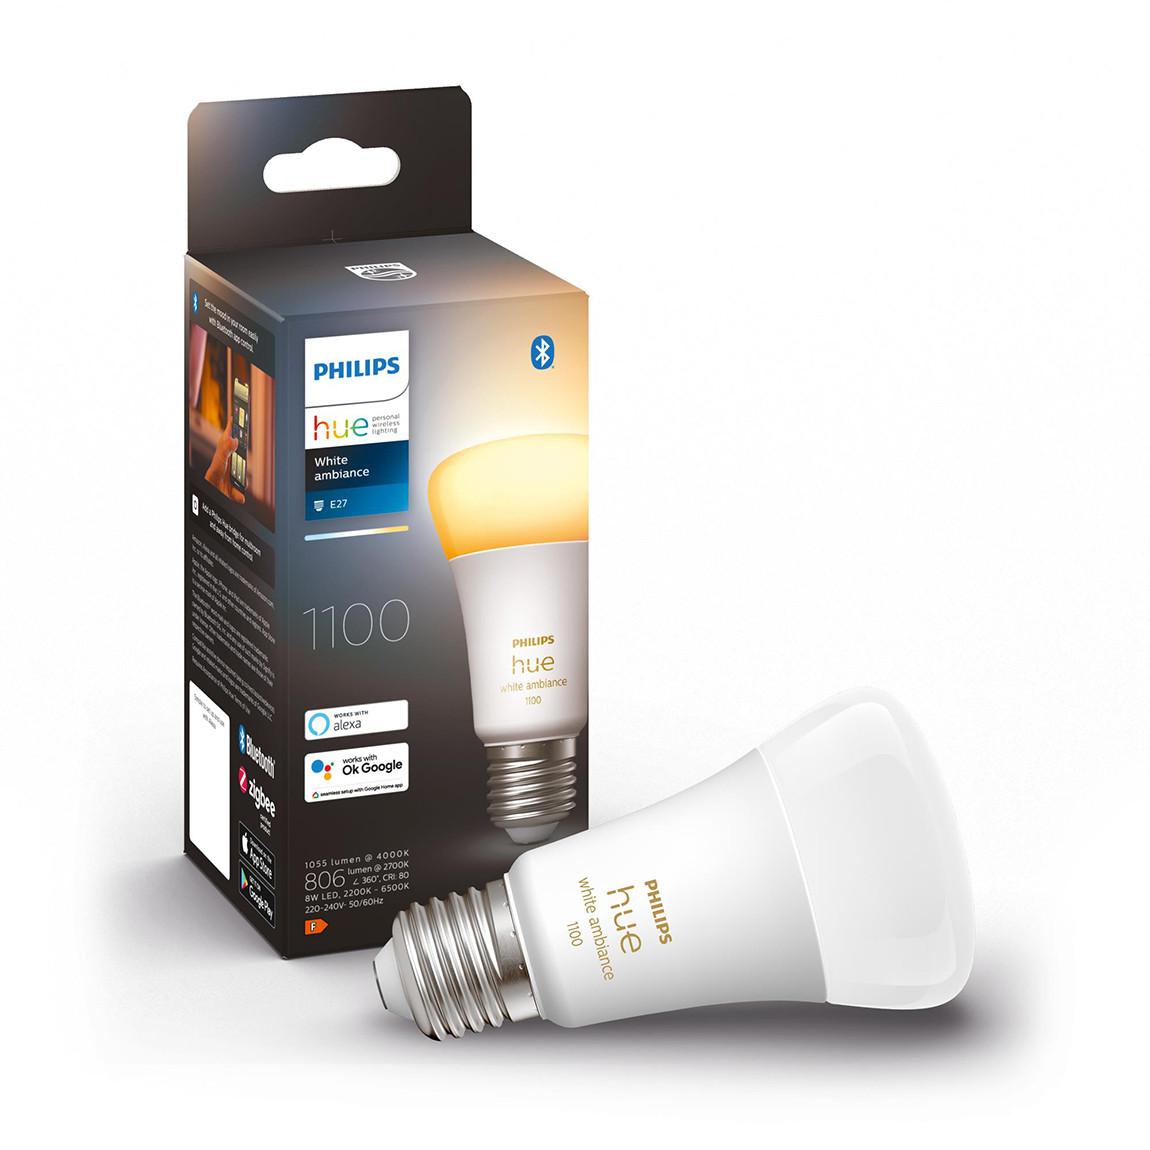 Philips Hue White Ambiance E27 1100 mit Verpackung